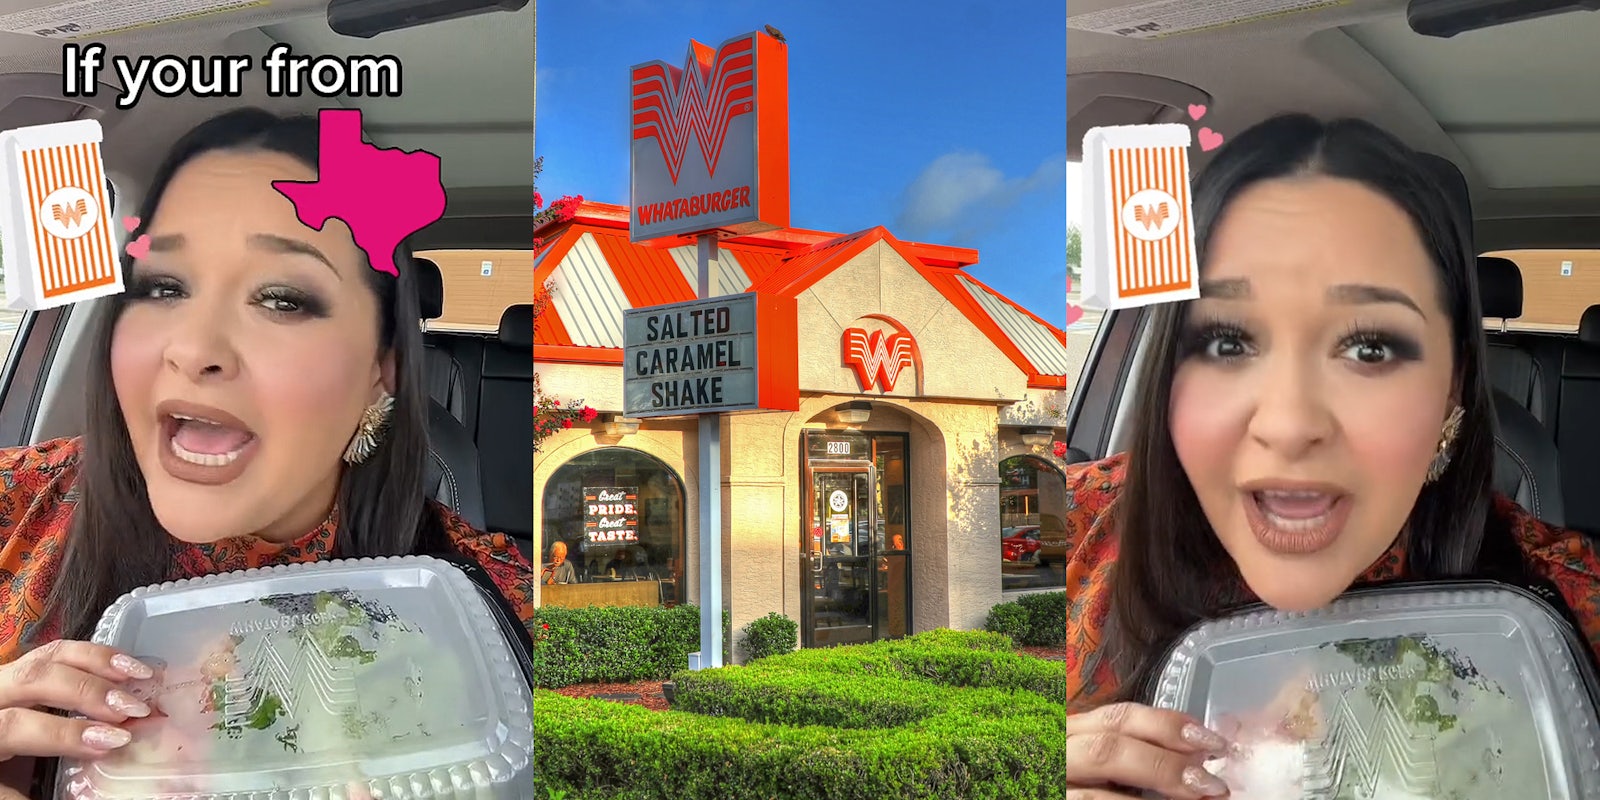 woman speaking in car holding Whataburger food in container caption 'If your from' (l) Whataburger building with sign (c) woman speaking in car holding Whataburger food in container (r)